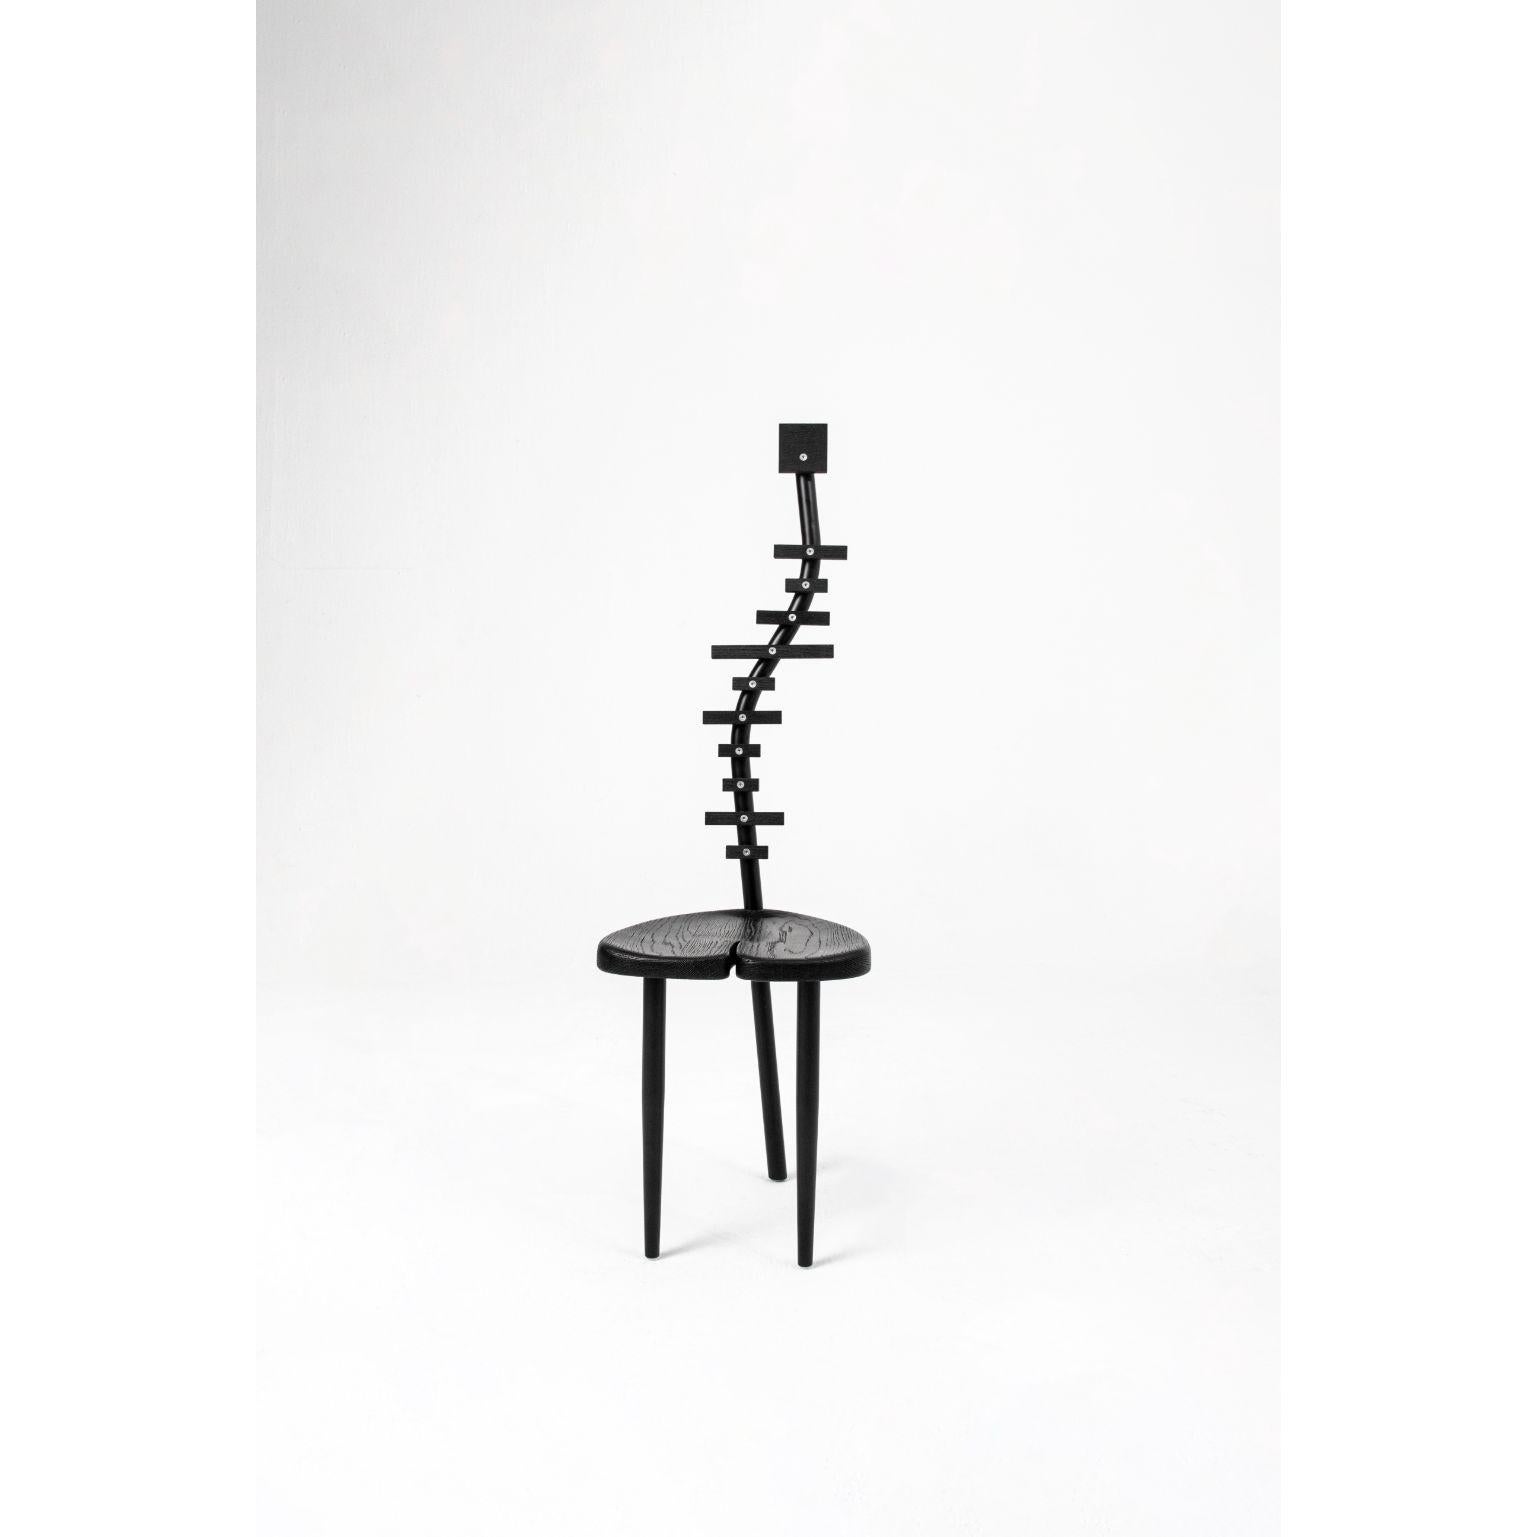 S-70 by Studiofer
Materials: Oak wood, metal
Dimensions: W 38, D 43.5, H 126 cm

S-70 is an artistic piece that embodies anatomical similarities that represent scoliosis. The S-70 lays foundation of 2 worlds coming together, the natural and